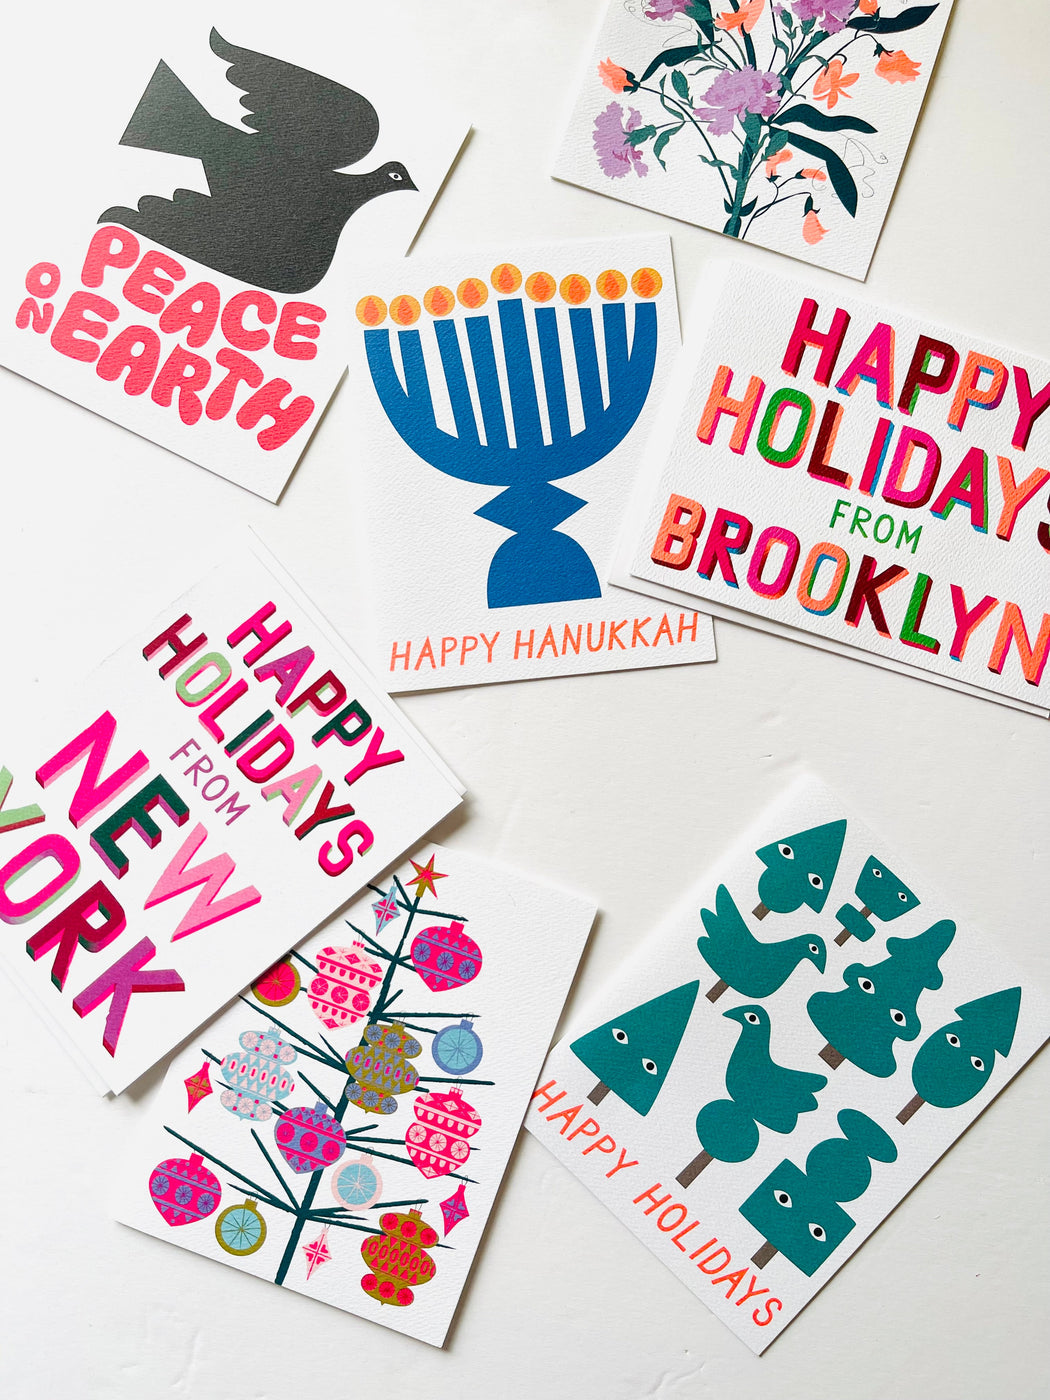 Happy Holidays from Brooklyn Note Card